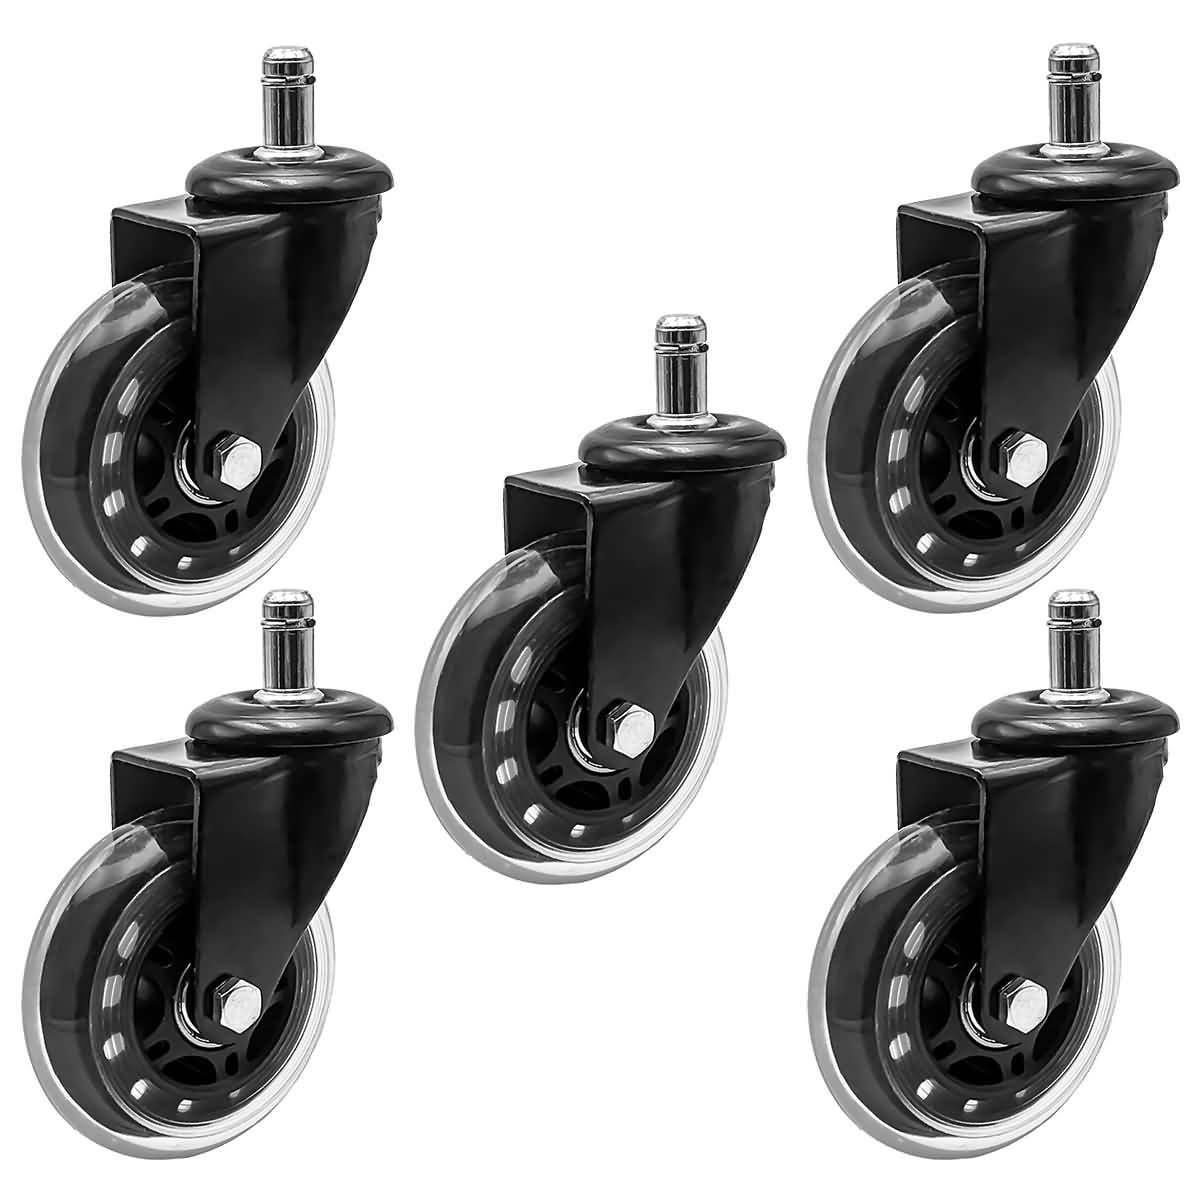 5 Pcs 3" Office Chair Caster Wheels with Brake Replacement Universal Heavy Duty 